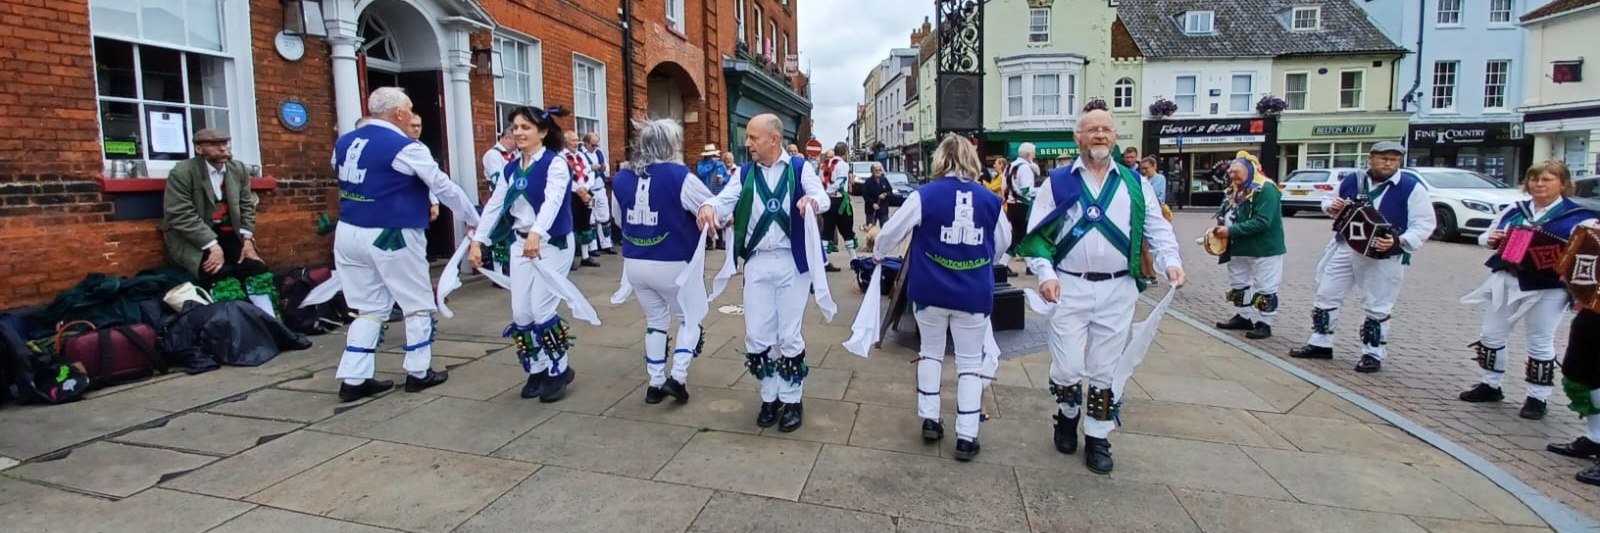 Whitchurch Morris Header Picture